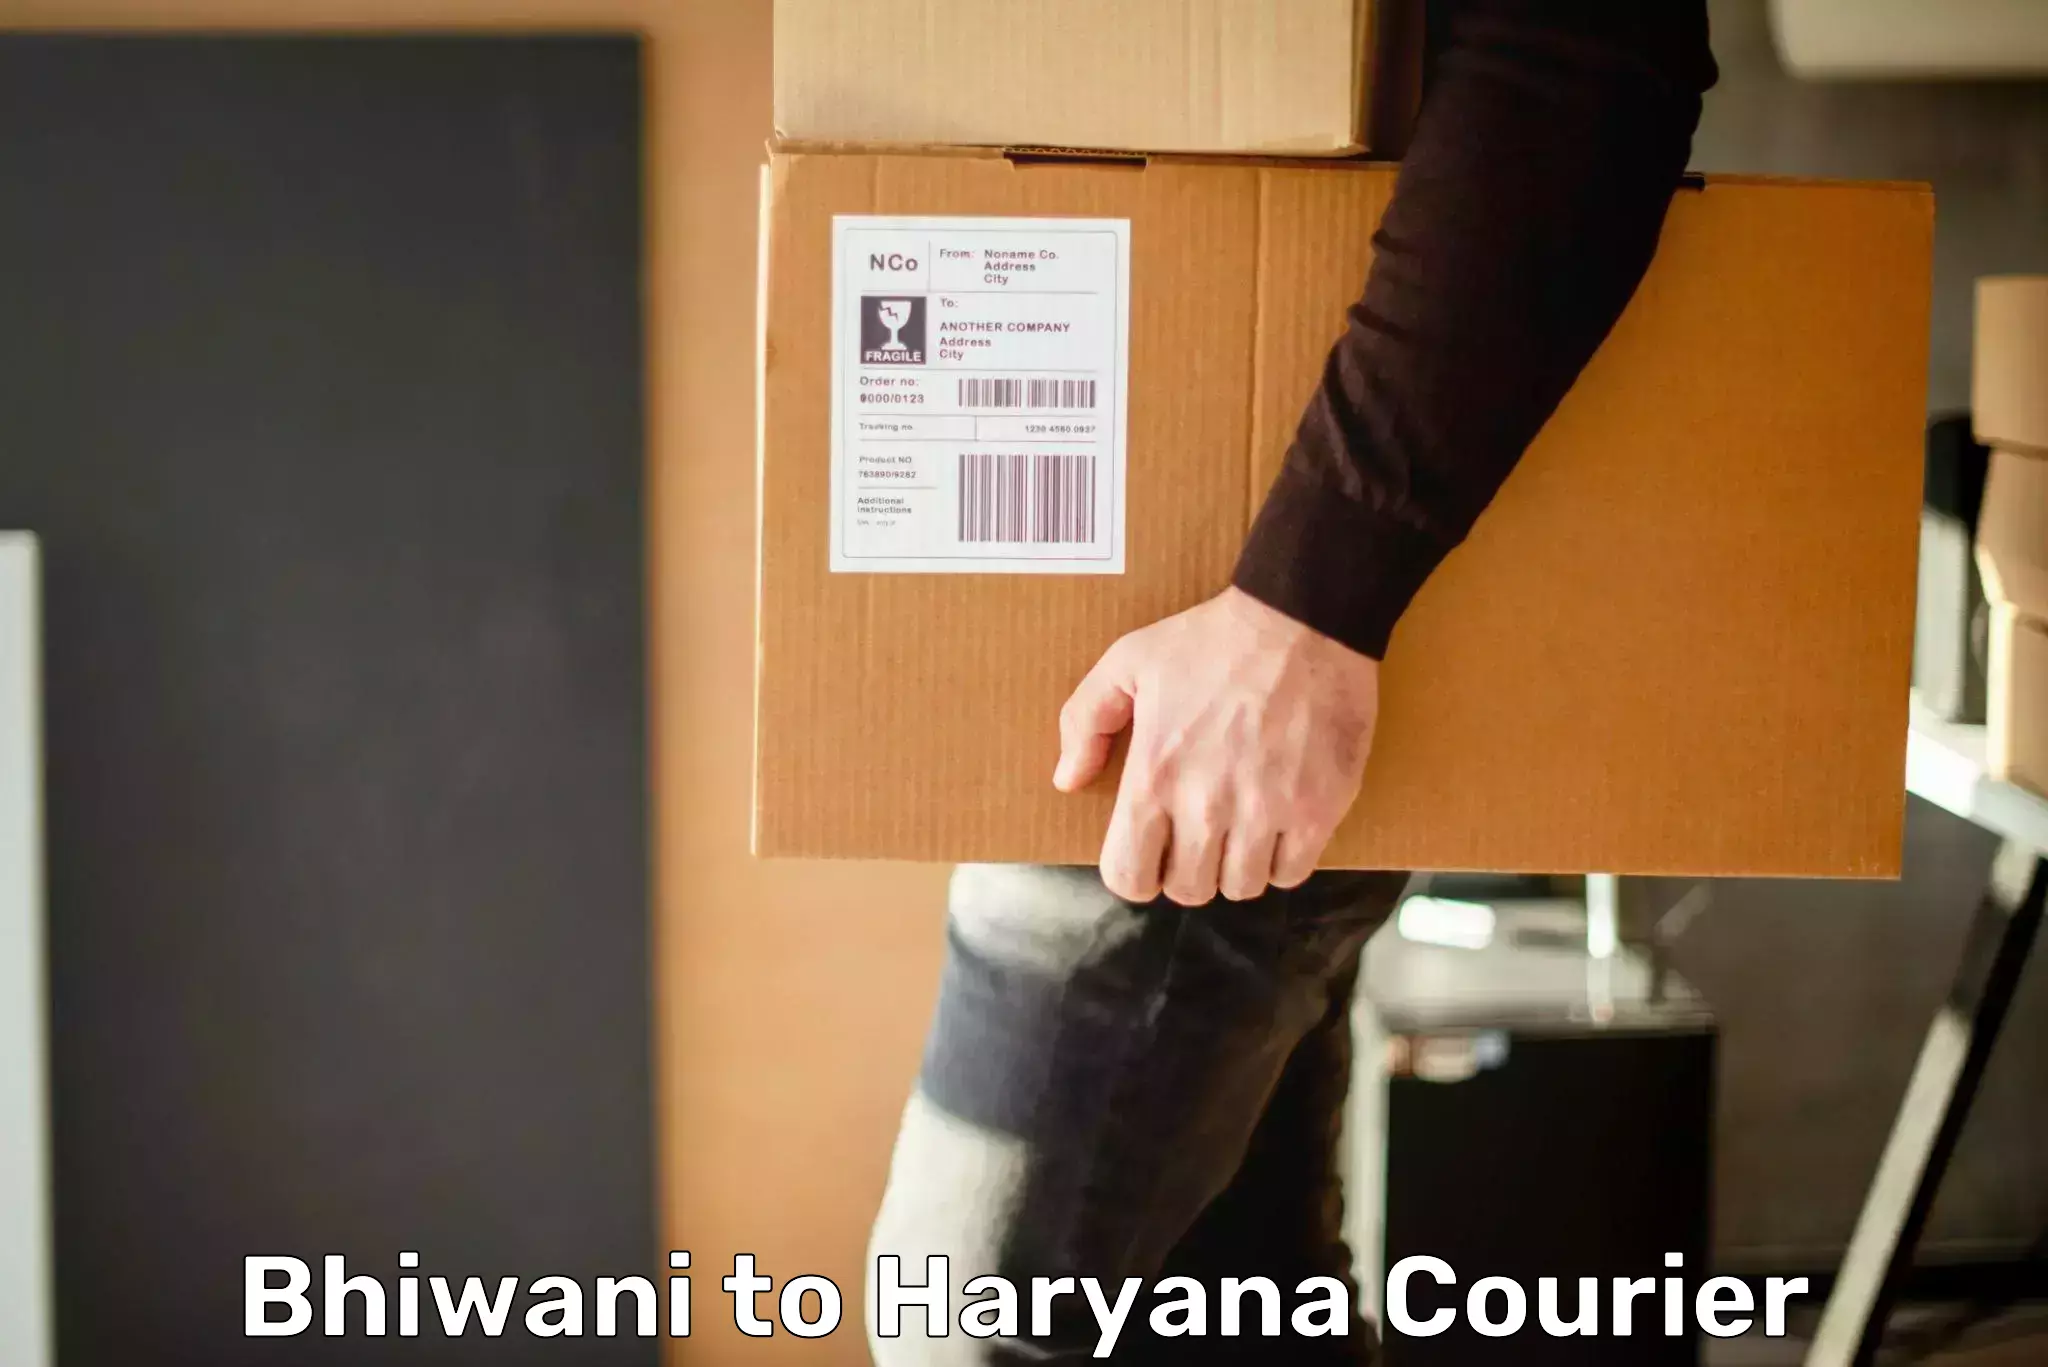 State-of-the-art courier technology Bhiwani to Hansi